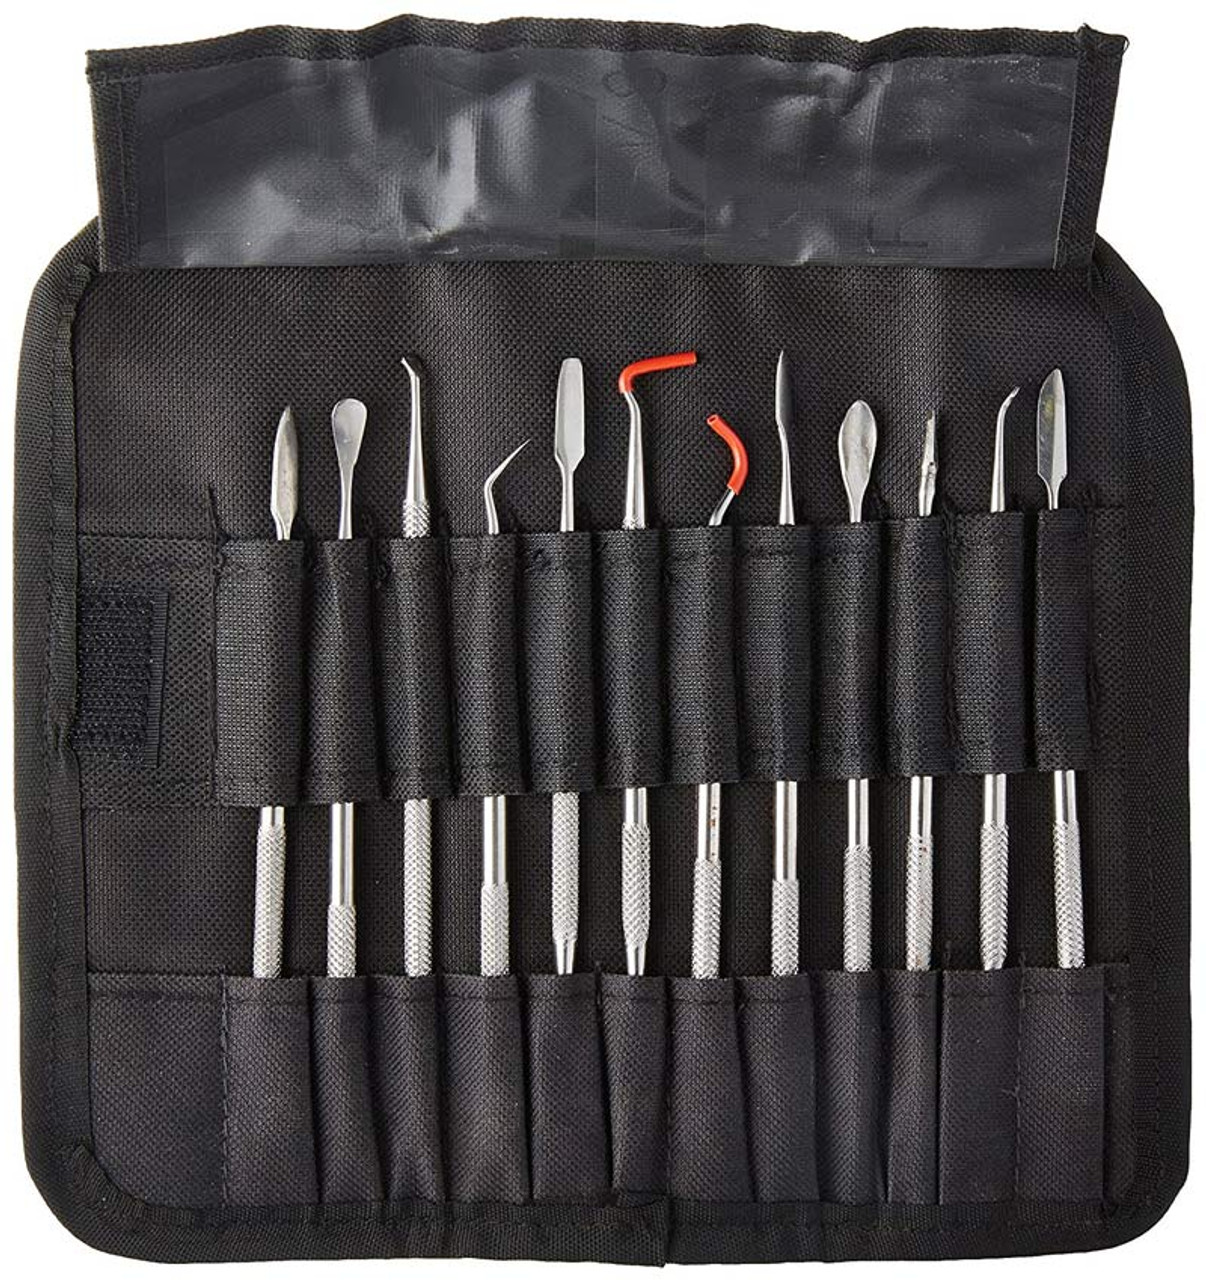 MMOBIEL 12 Pcs Stainless Steel Wax Carving Set Wax Carvers Chisel Tools  Double-Ended Polymer Scar SFX Makeup Clay Tools Fruit Carving - Pumpkin 